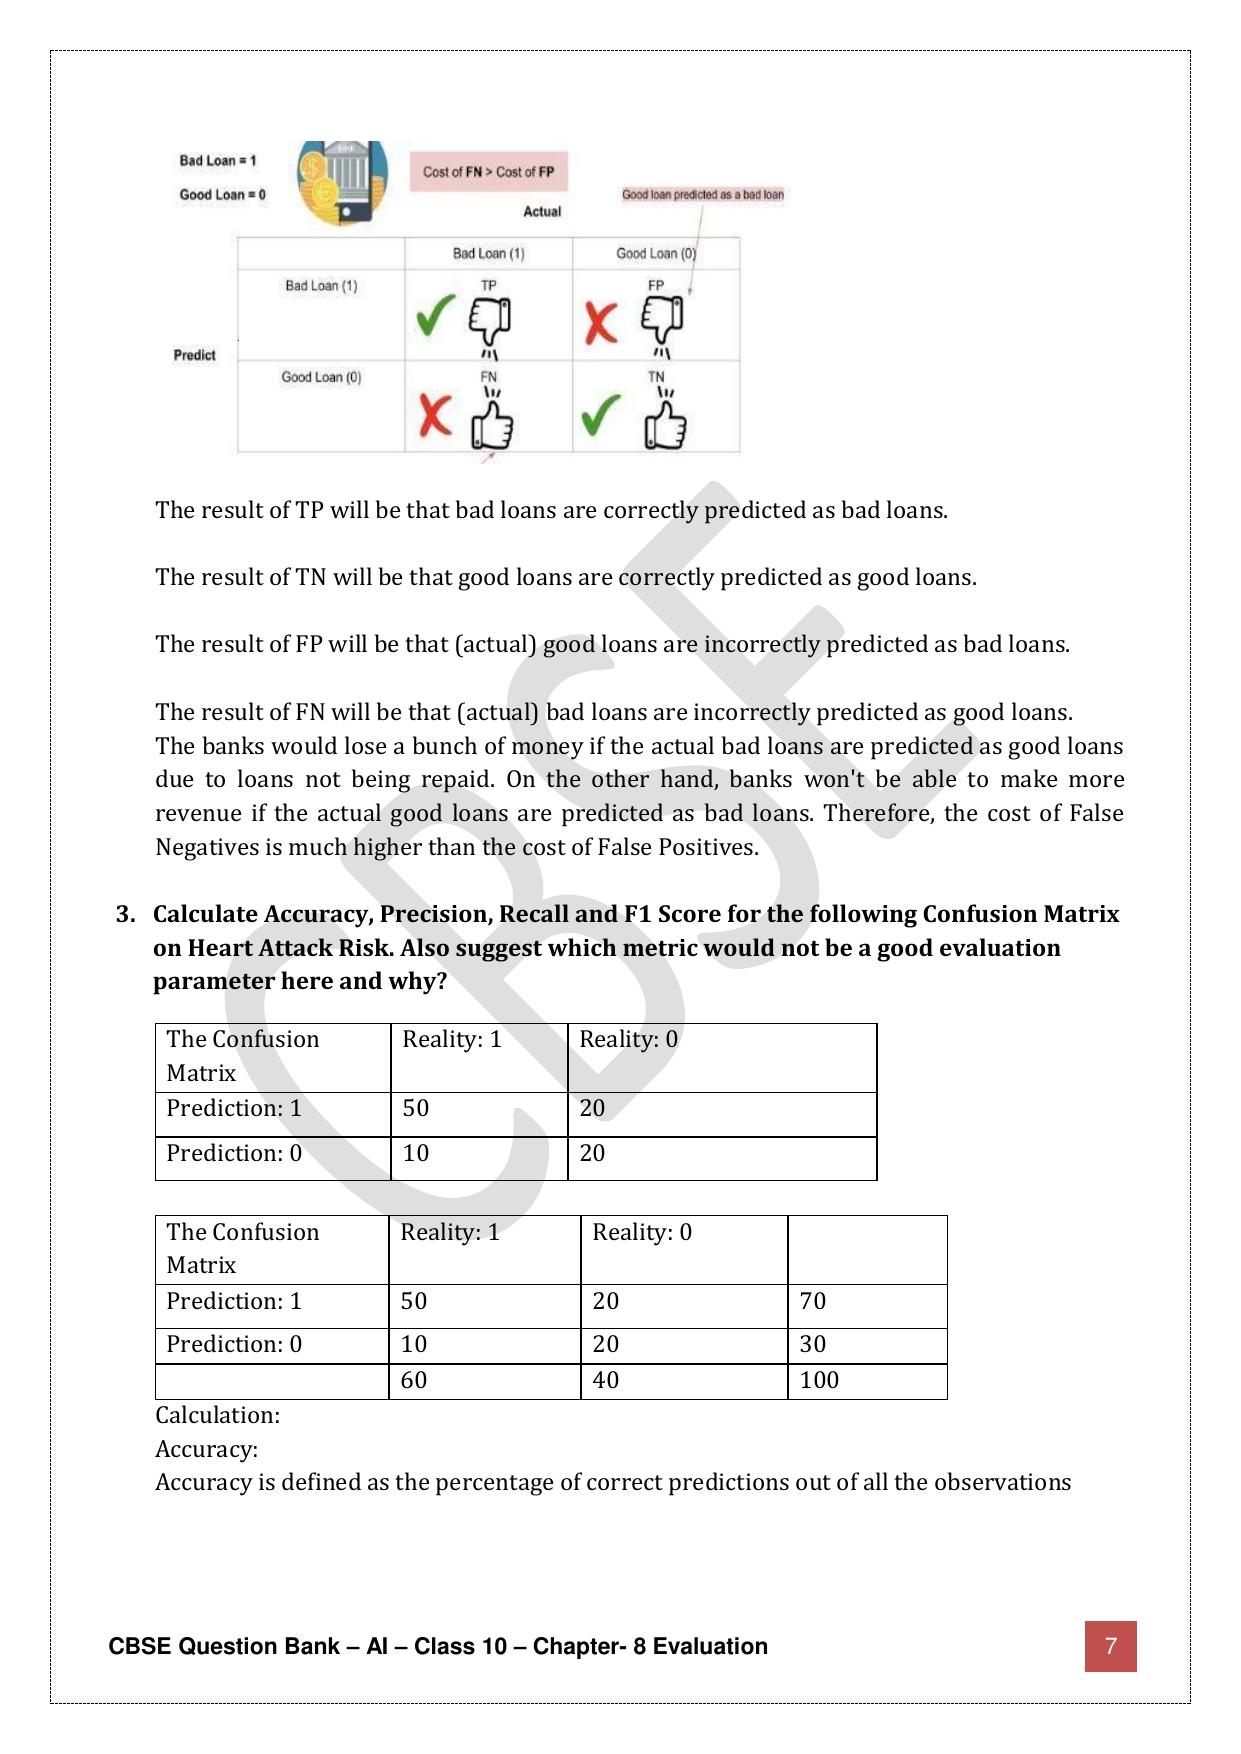 CBSE Class 10 Artificial Intelligence - Chapter 8 Question Bank - Page 7